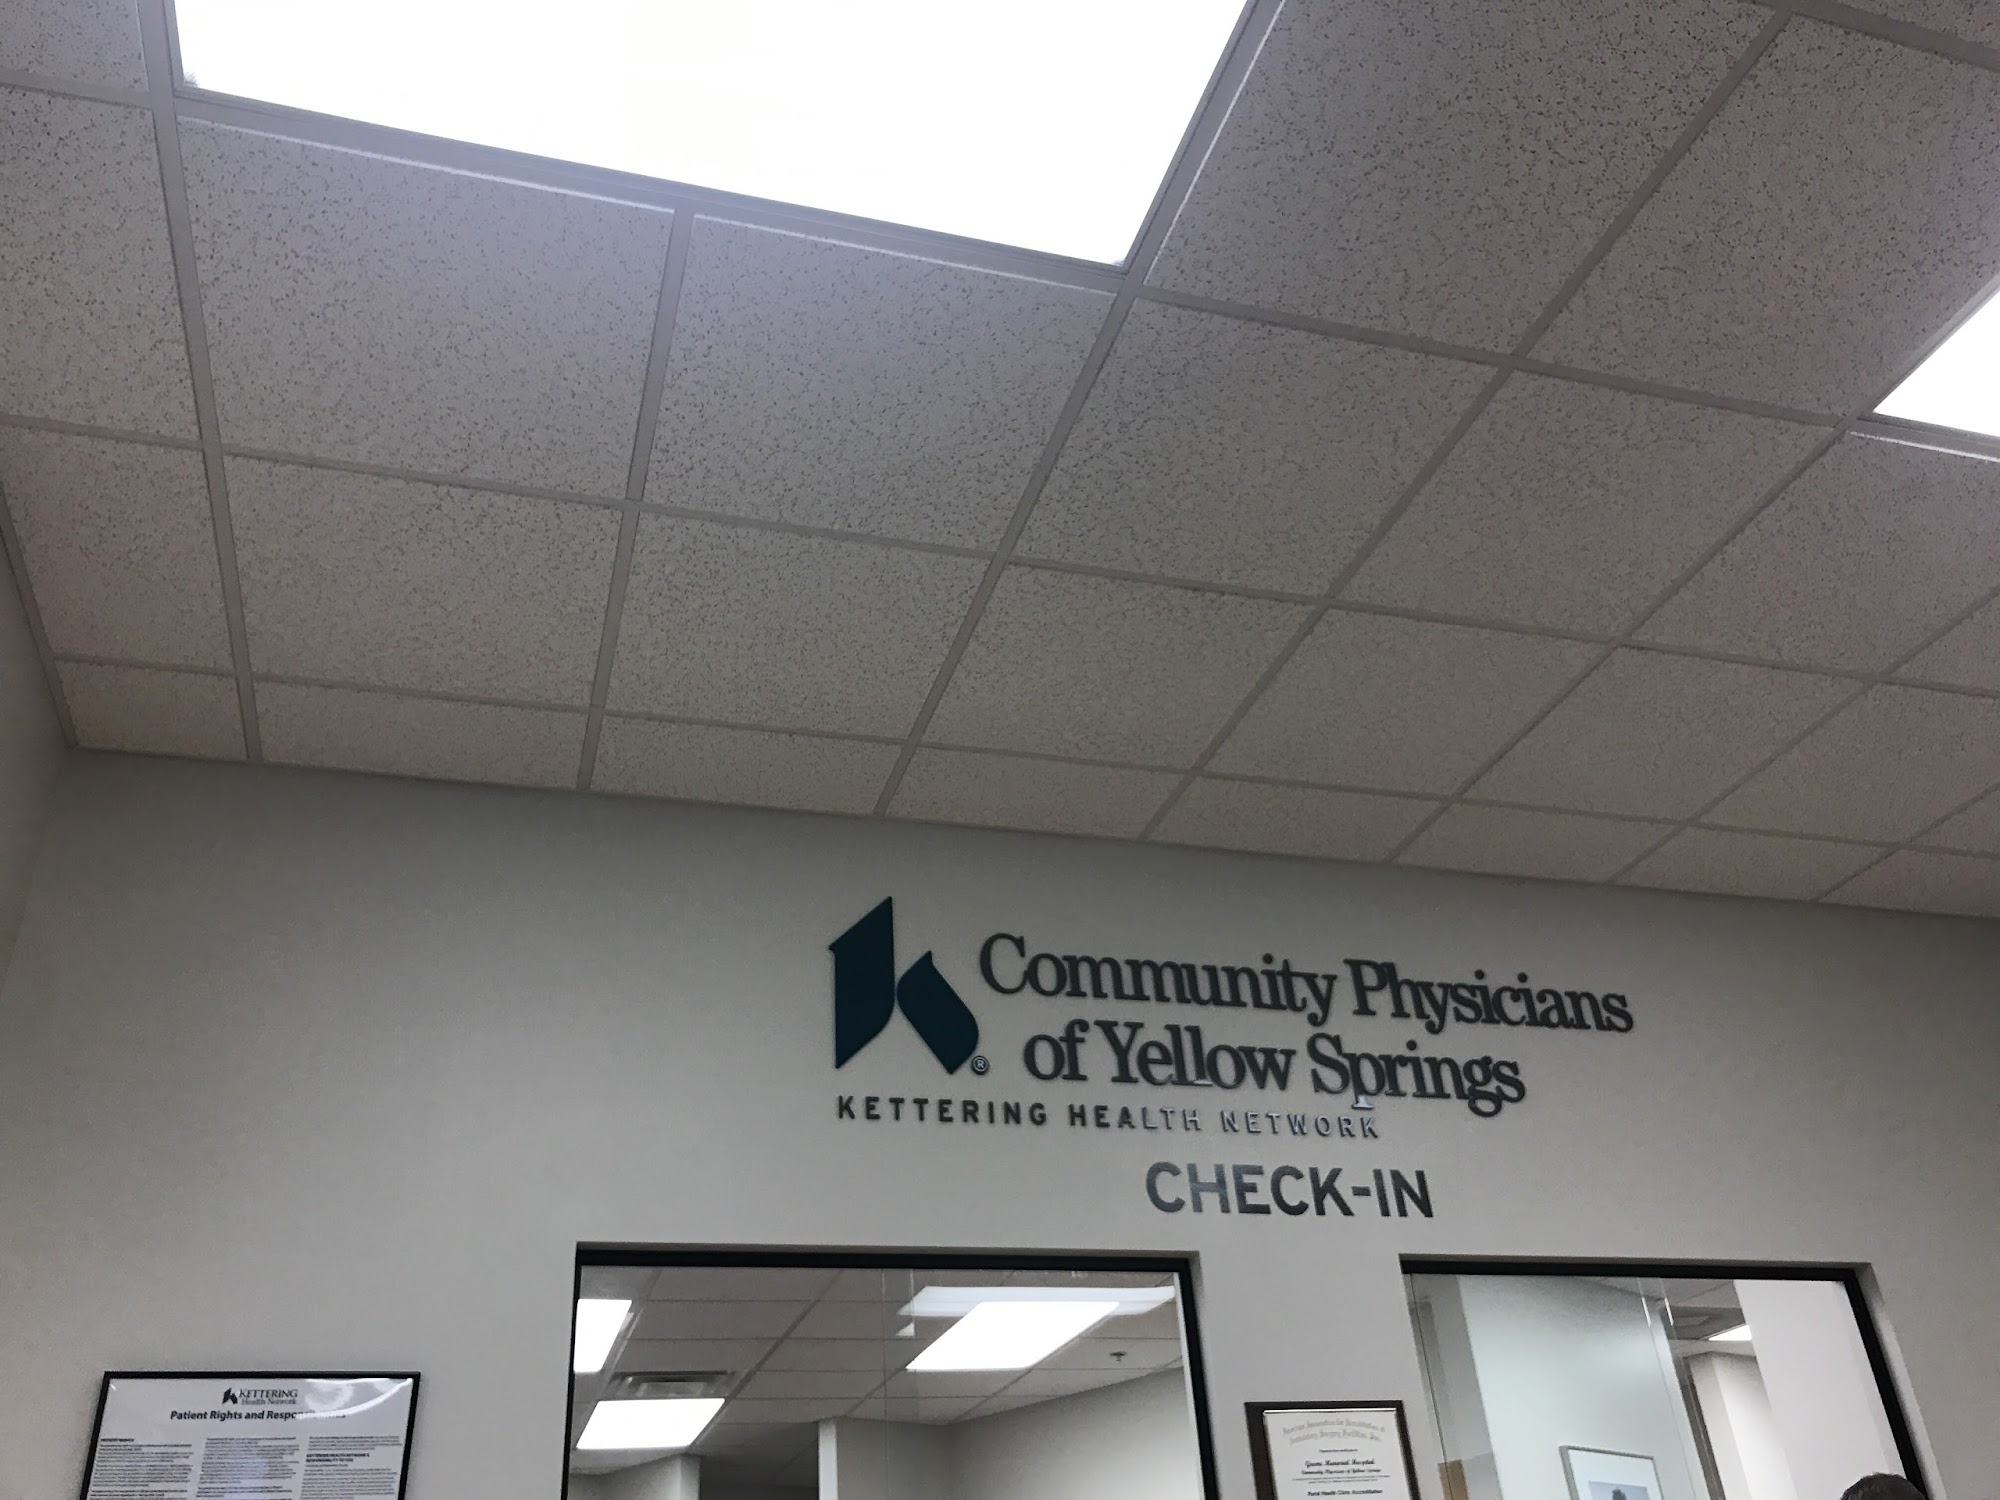 Community Physicians of Yellow Springs 888 Dayton Street #200 Parking lot on, E Enon Rd, Yellow Springs Ohio 45387